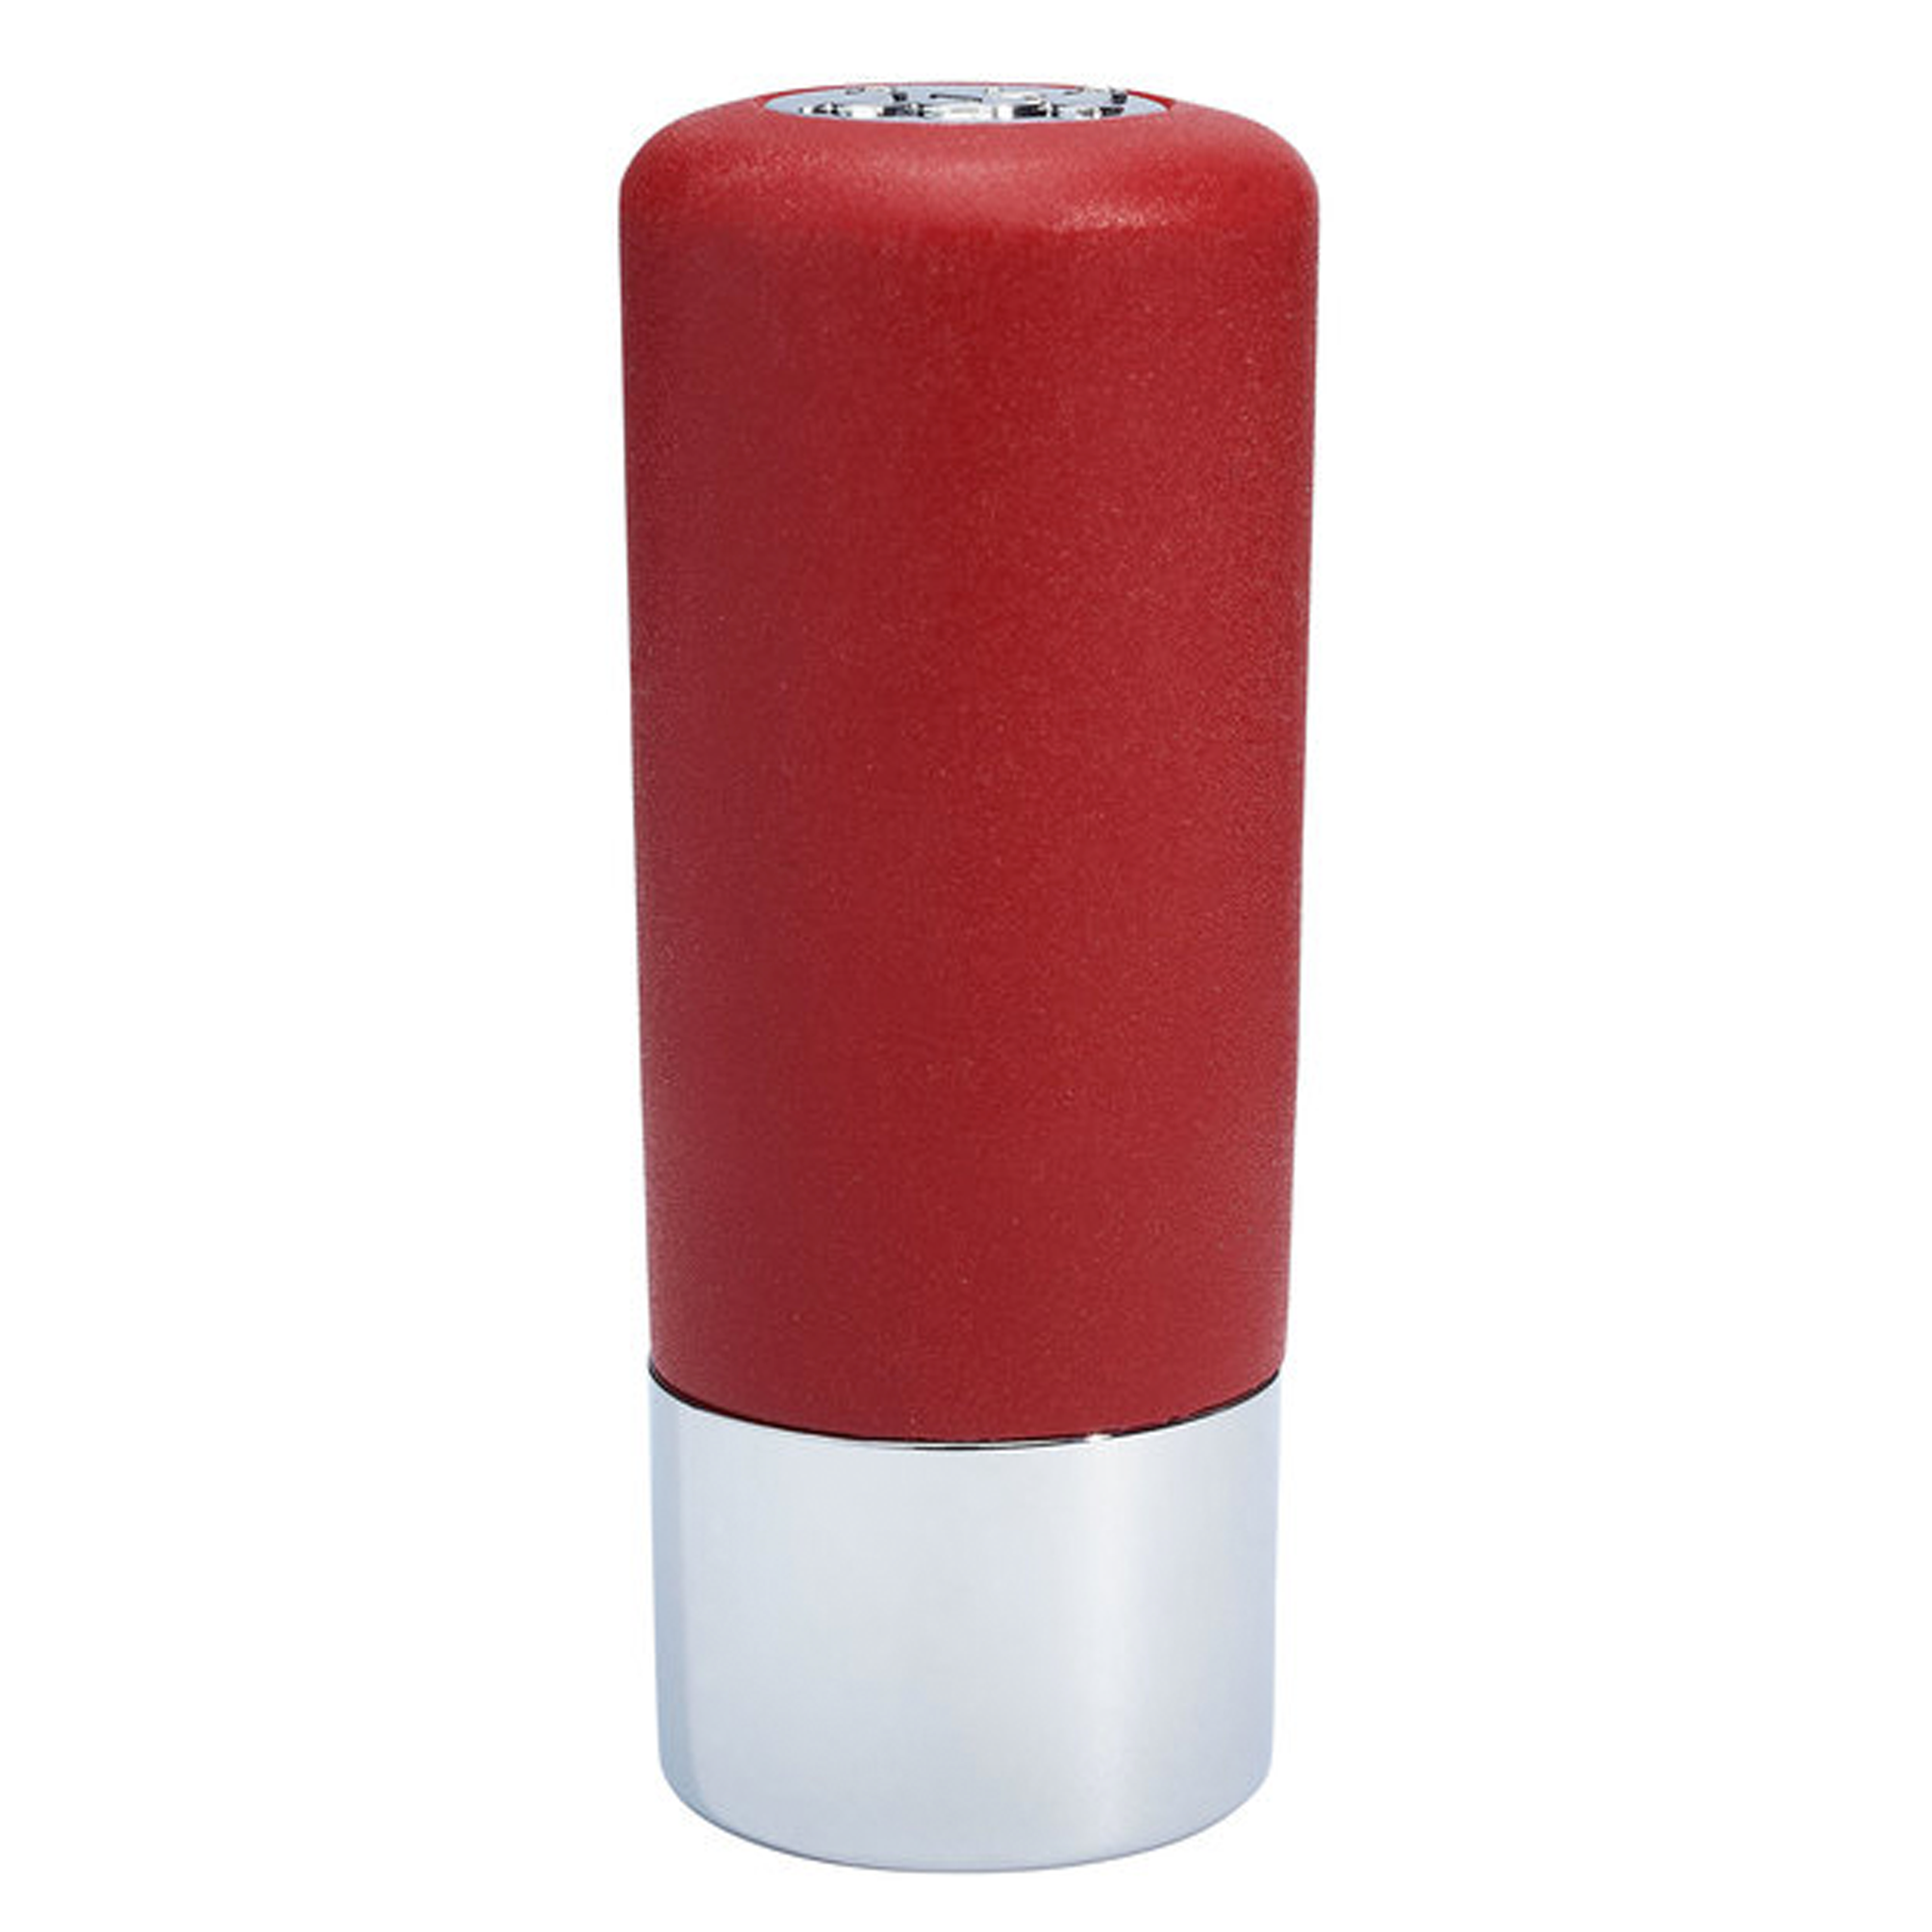 Charger Holder Metal/Red